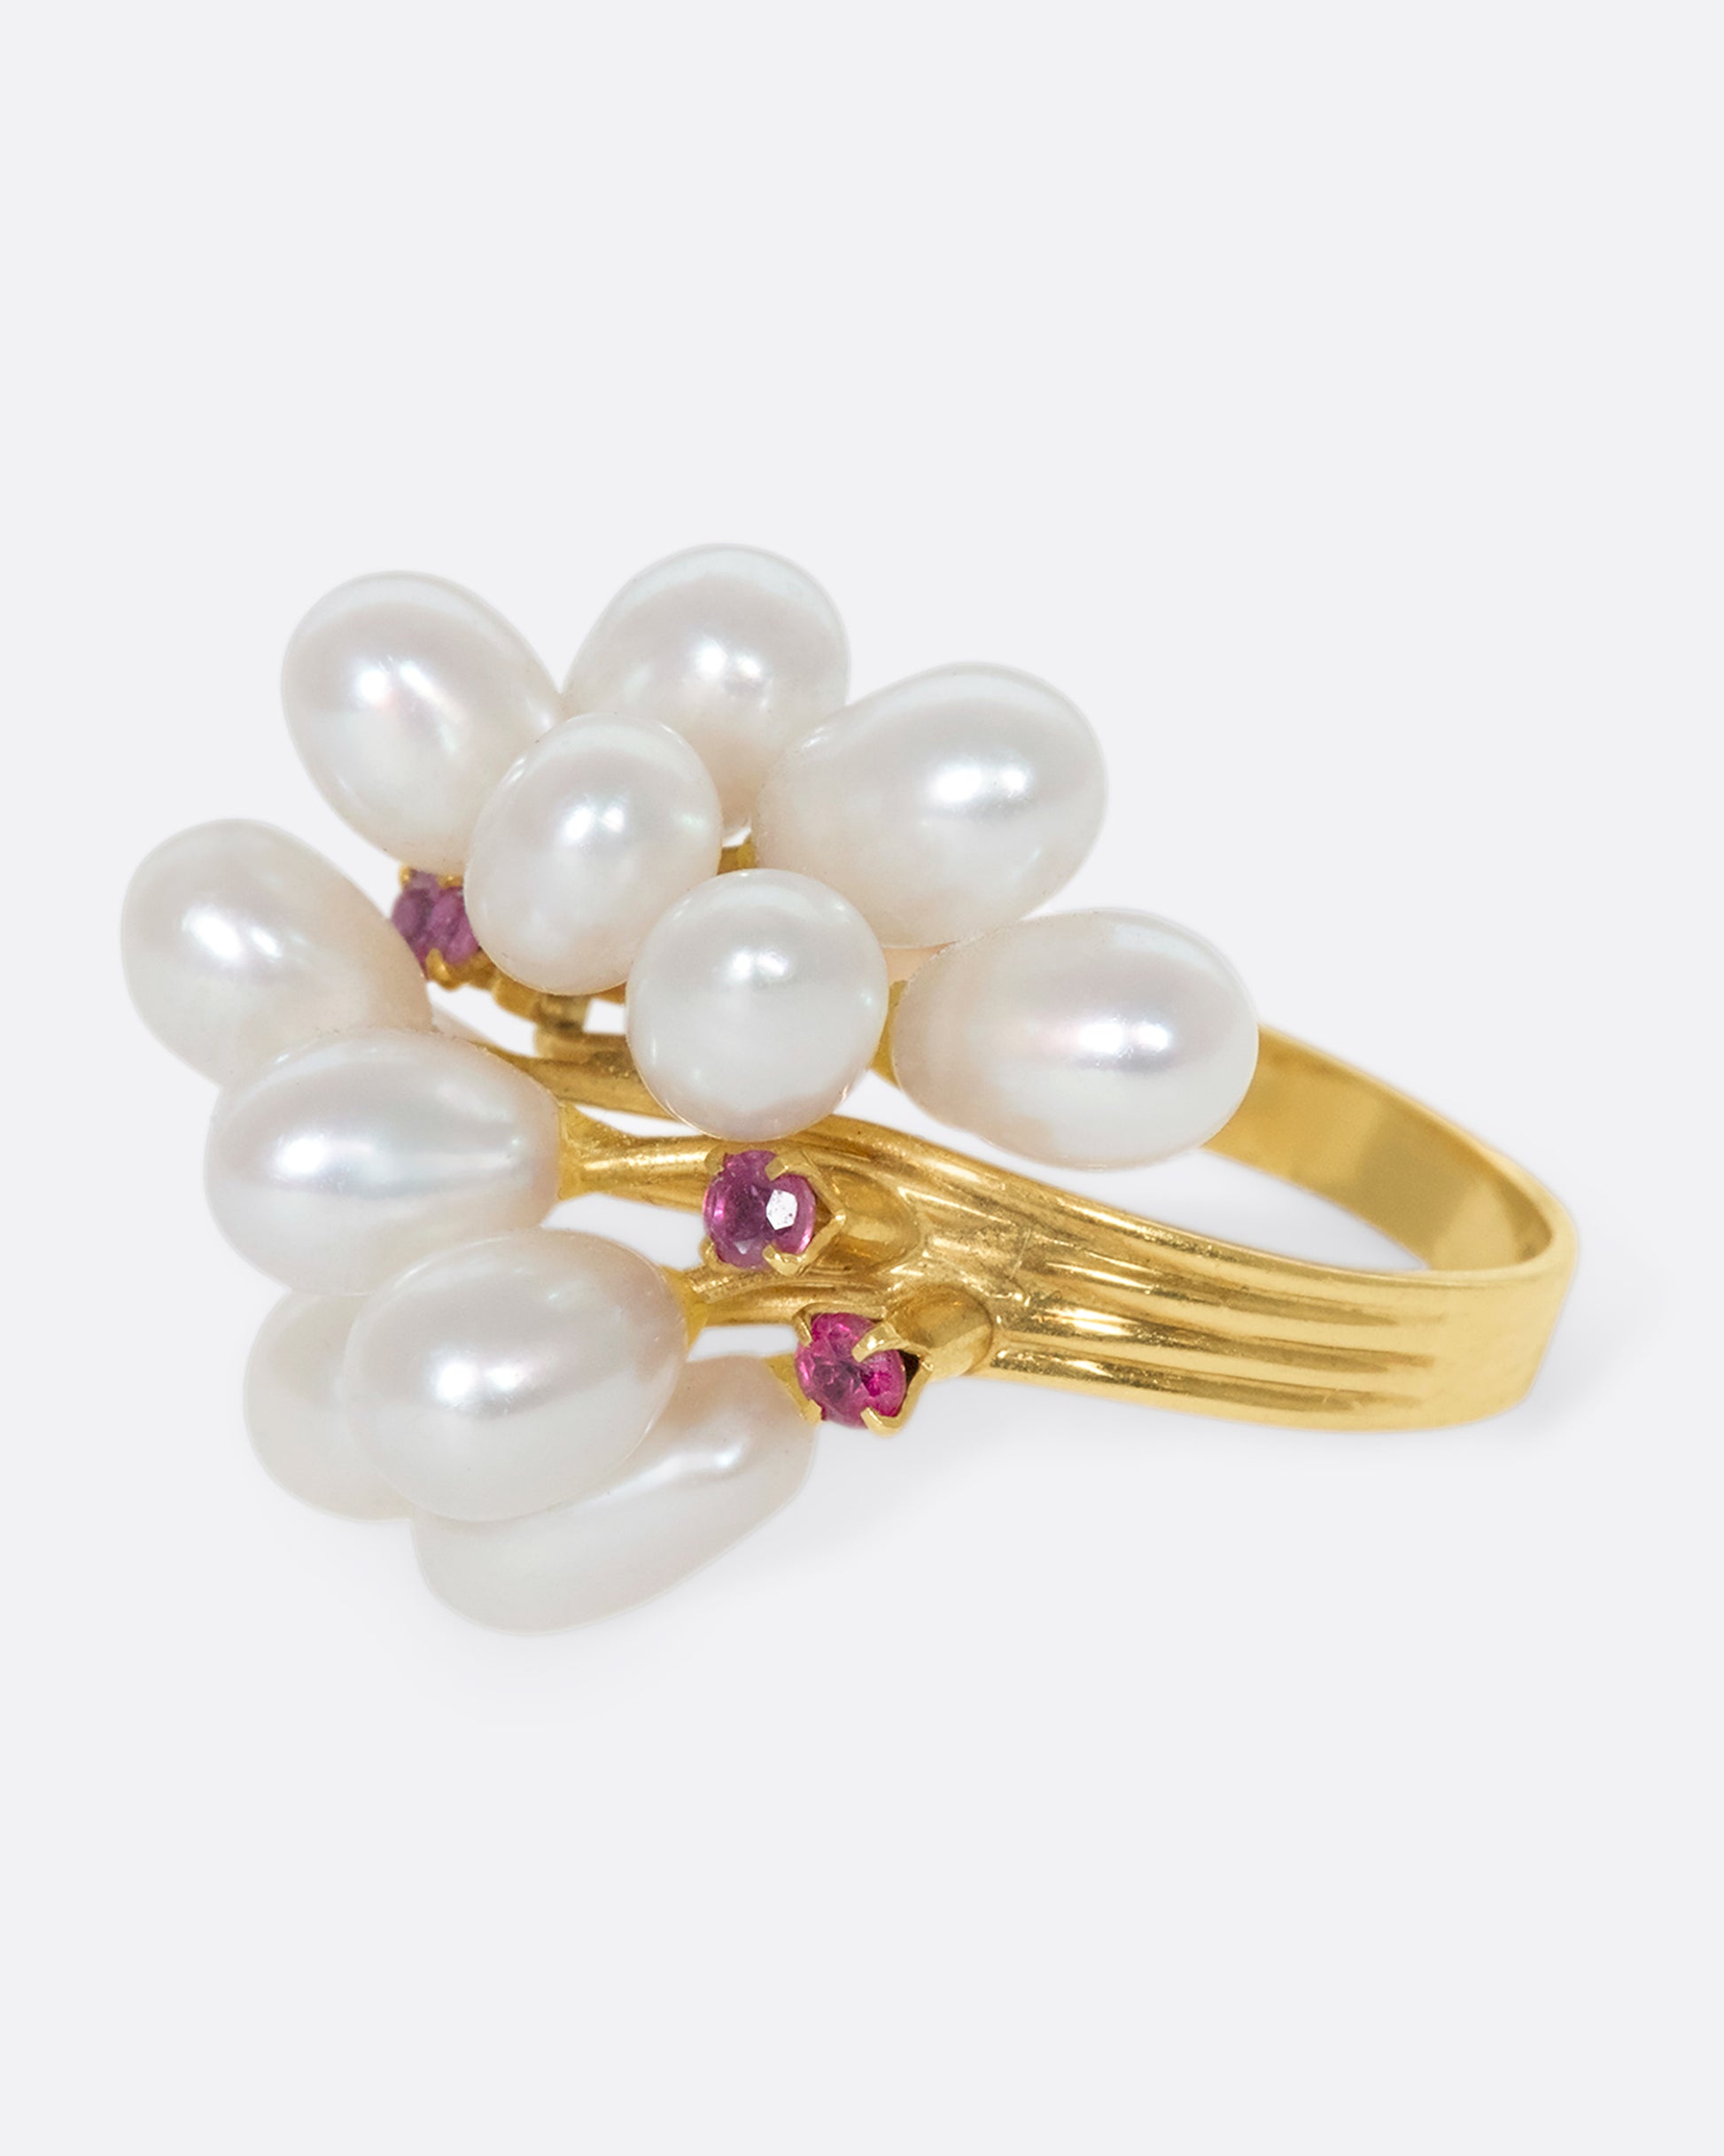 A 14k gold and pearl pussy willow ring with pink sapphire accents